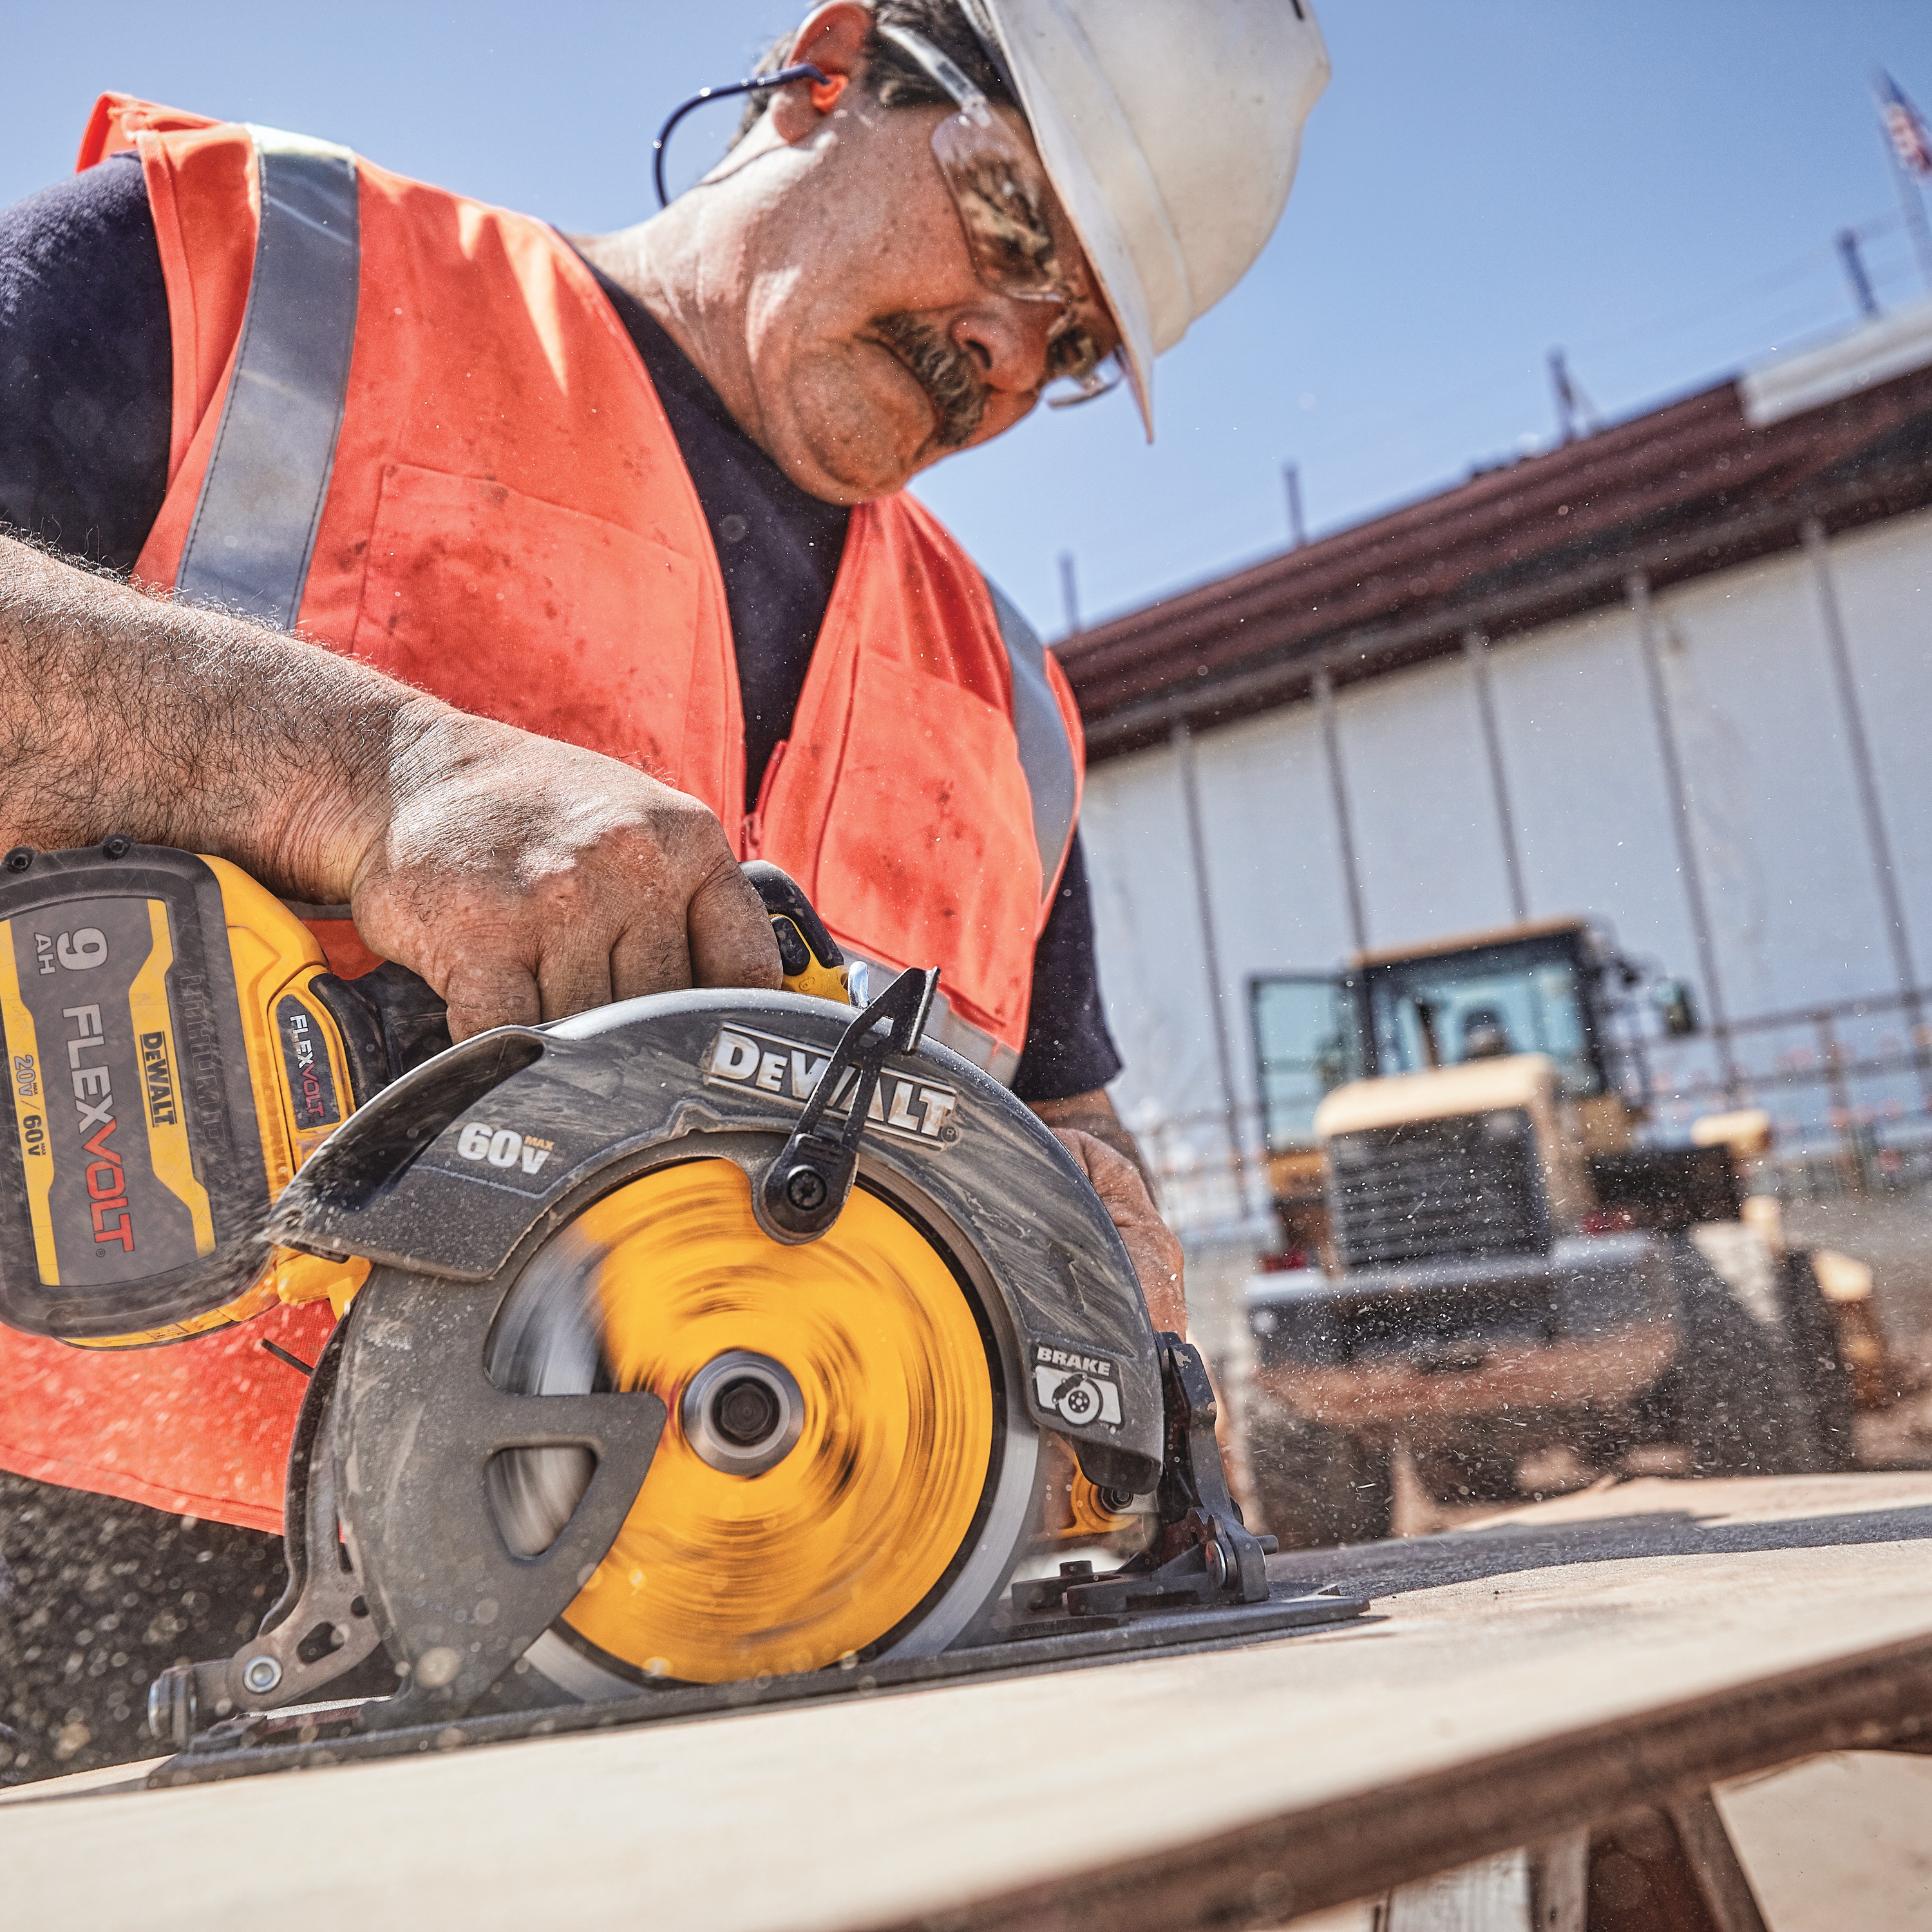 FLEXVOLT brushless cordless circular saw with brake kit being used by person to cut wood.